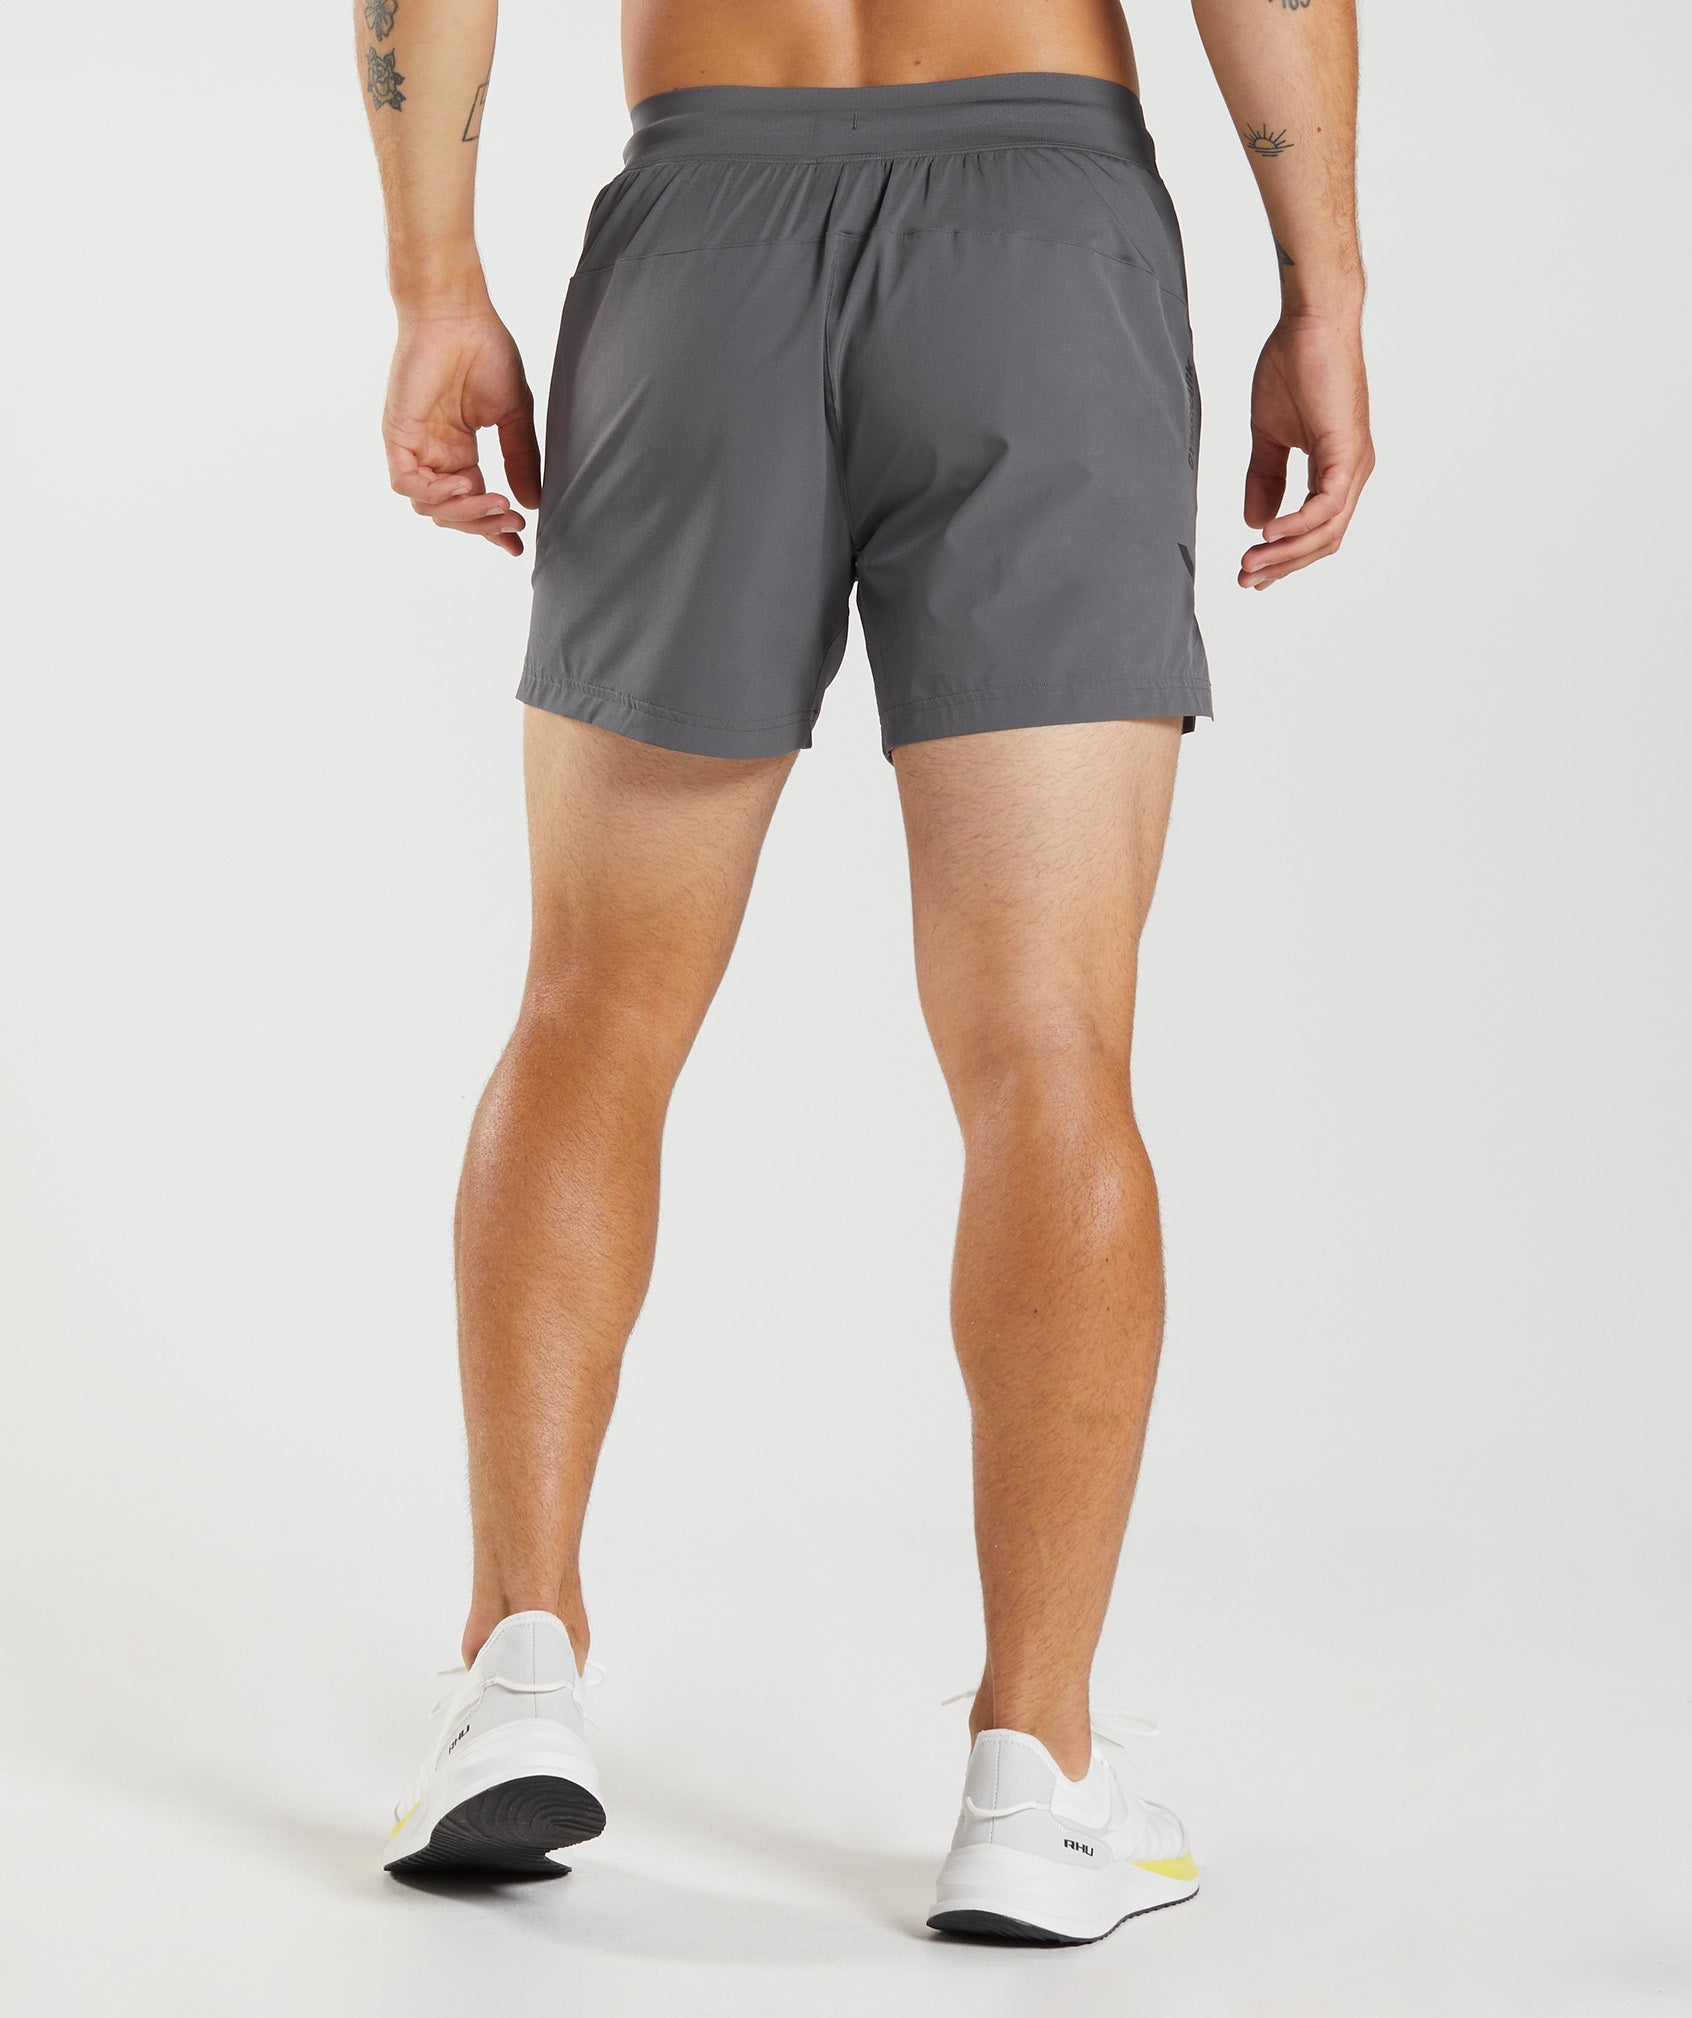 Apex 5" Perform Shorts in Silhouette Grey - view 2